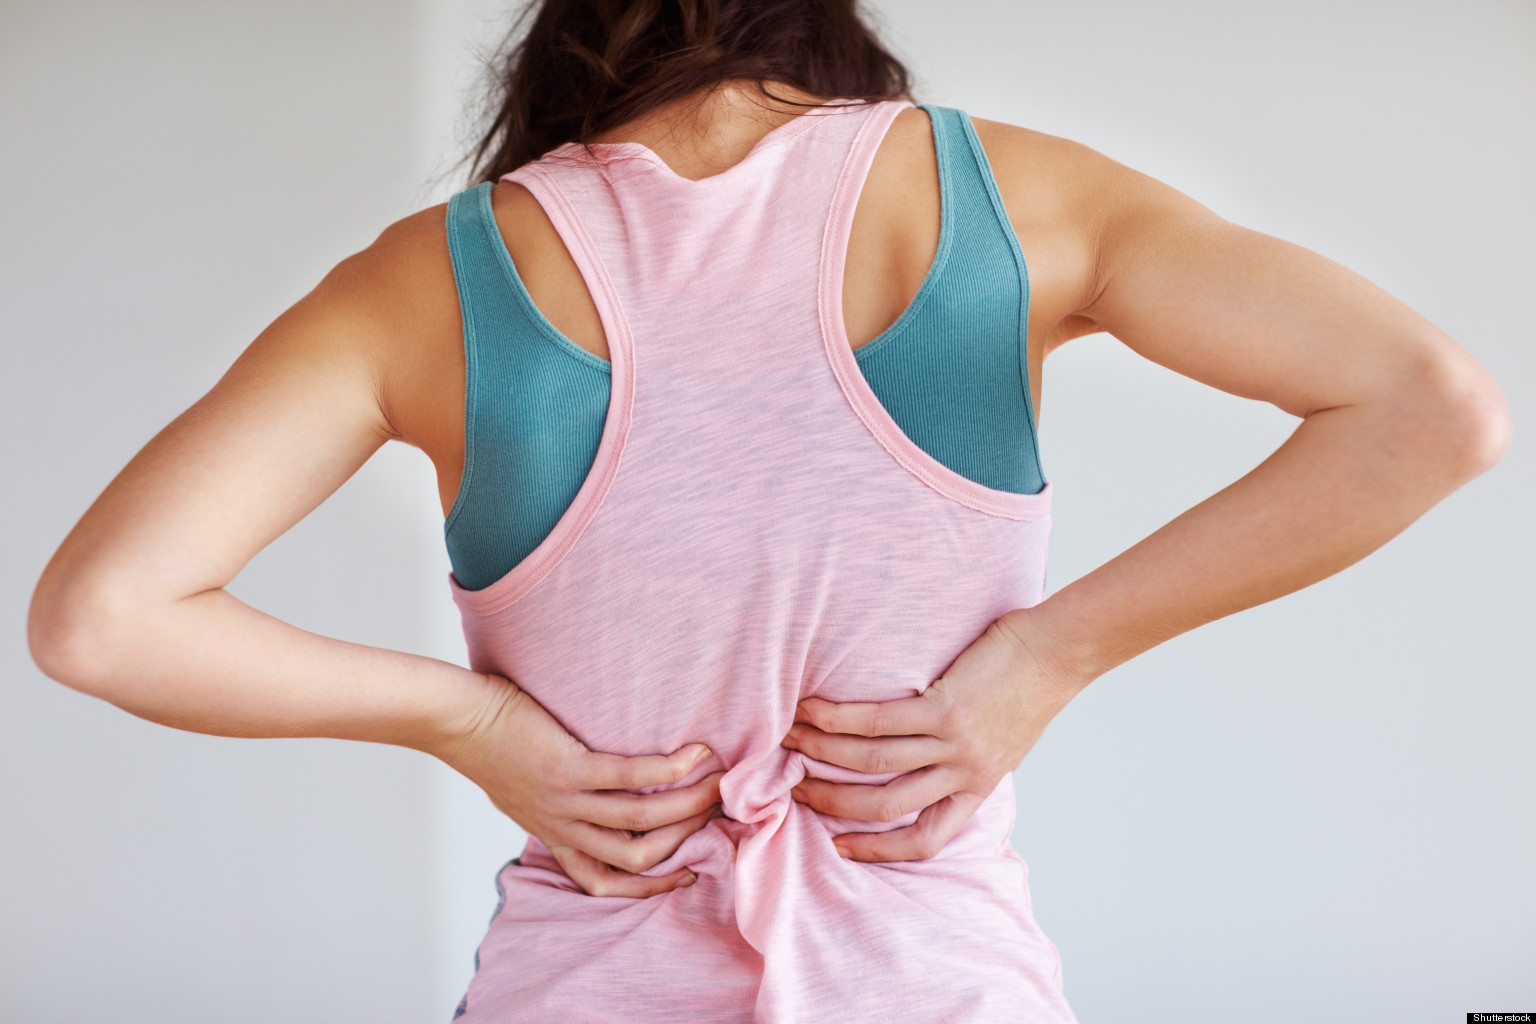 Do you suffer from low back pain? Come to our FREE seminar!